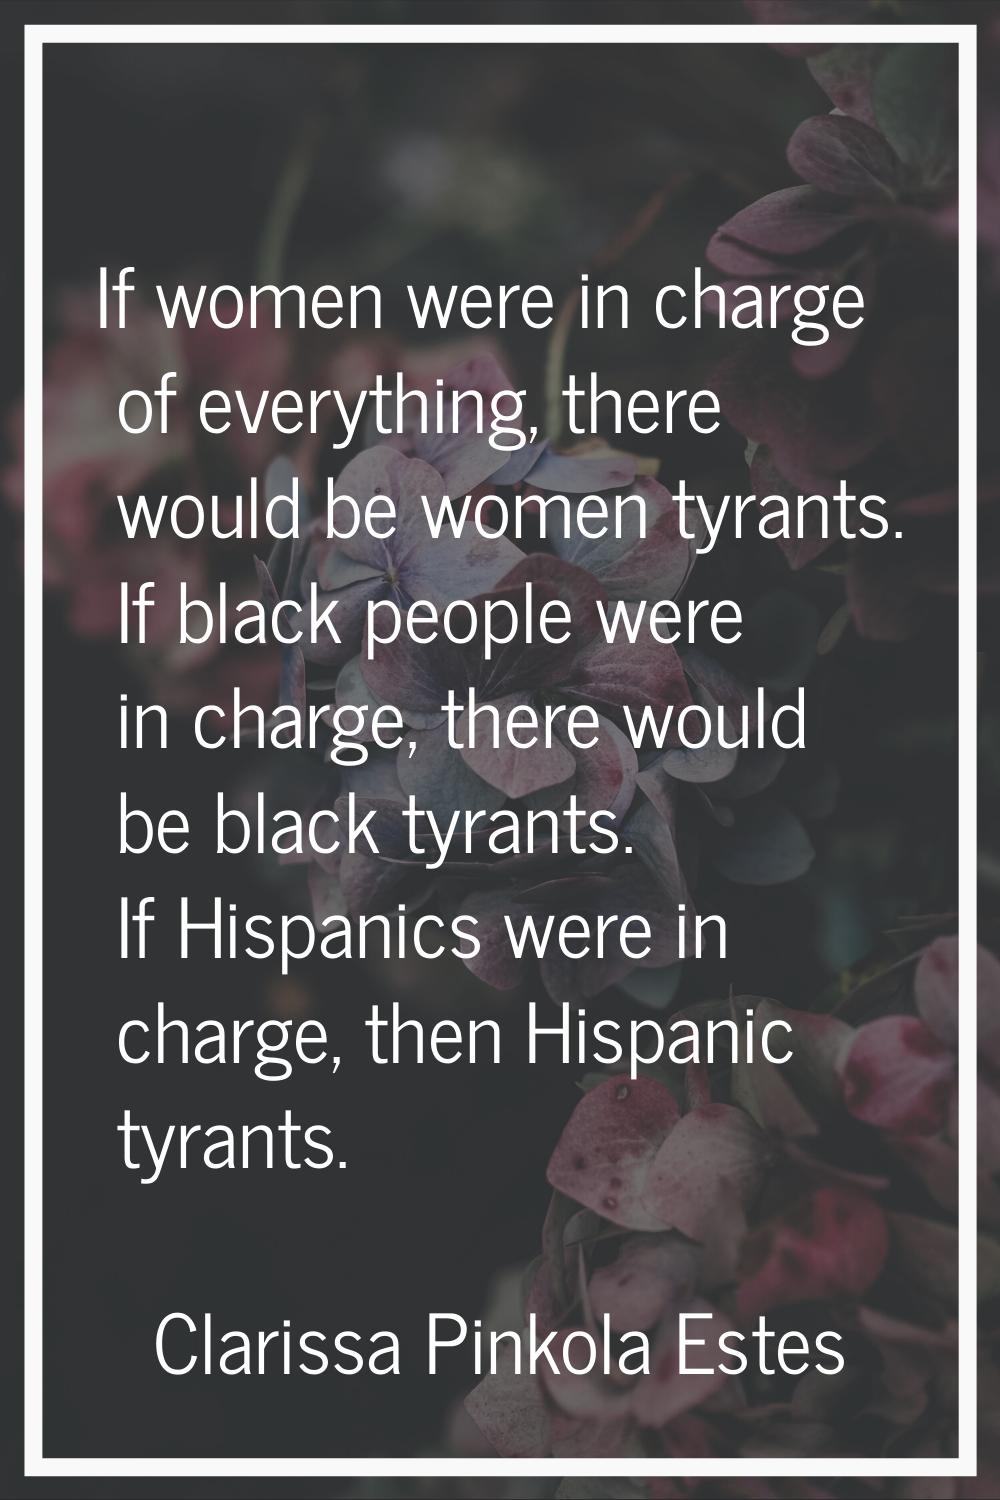 If women were in charge of everything, there would be women tyrants. If black people were in charge